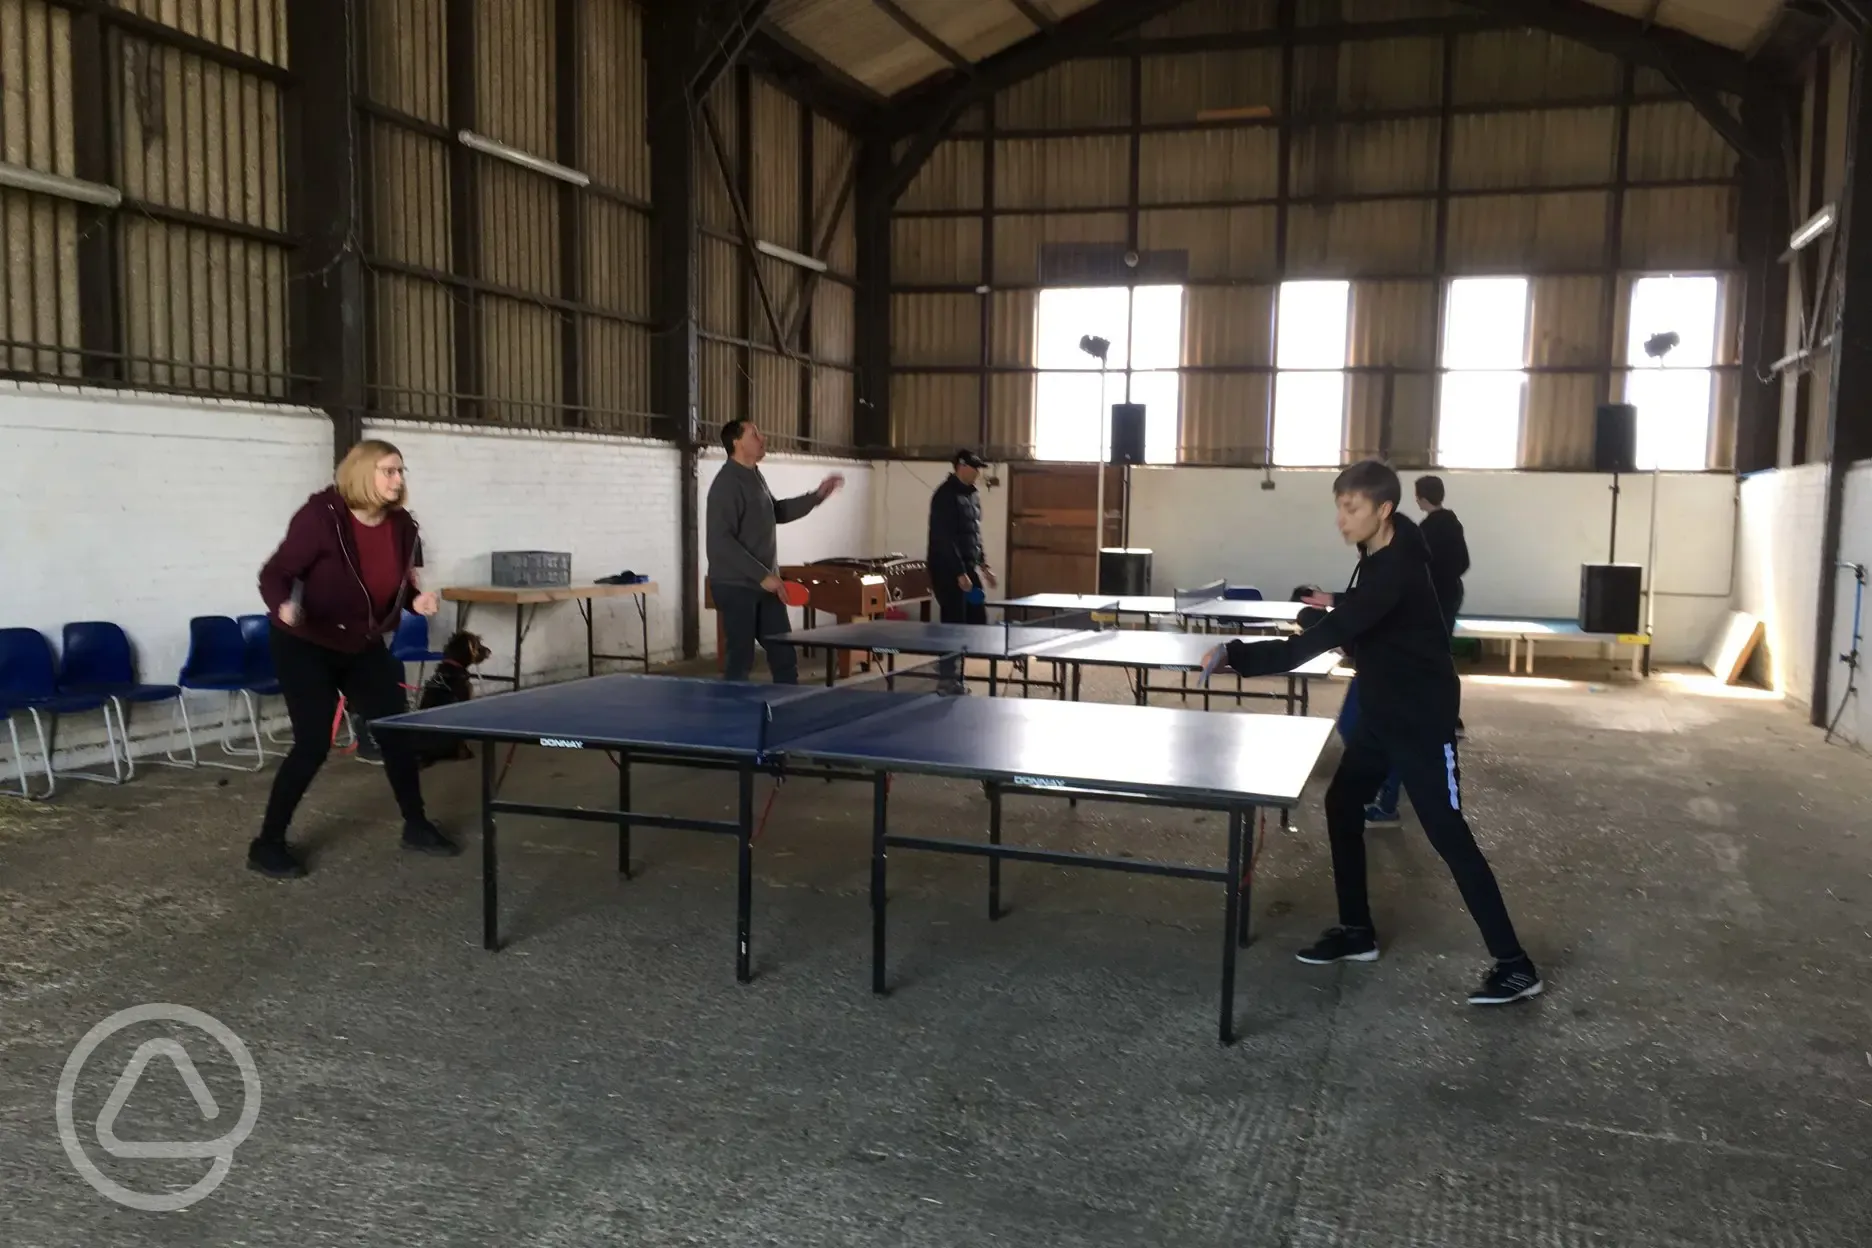 The Table Tennis Tables